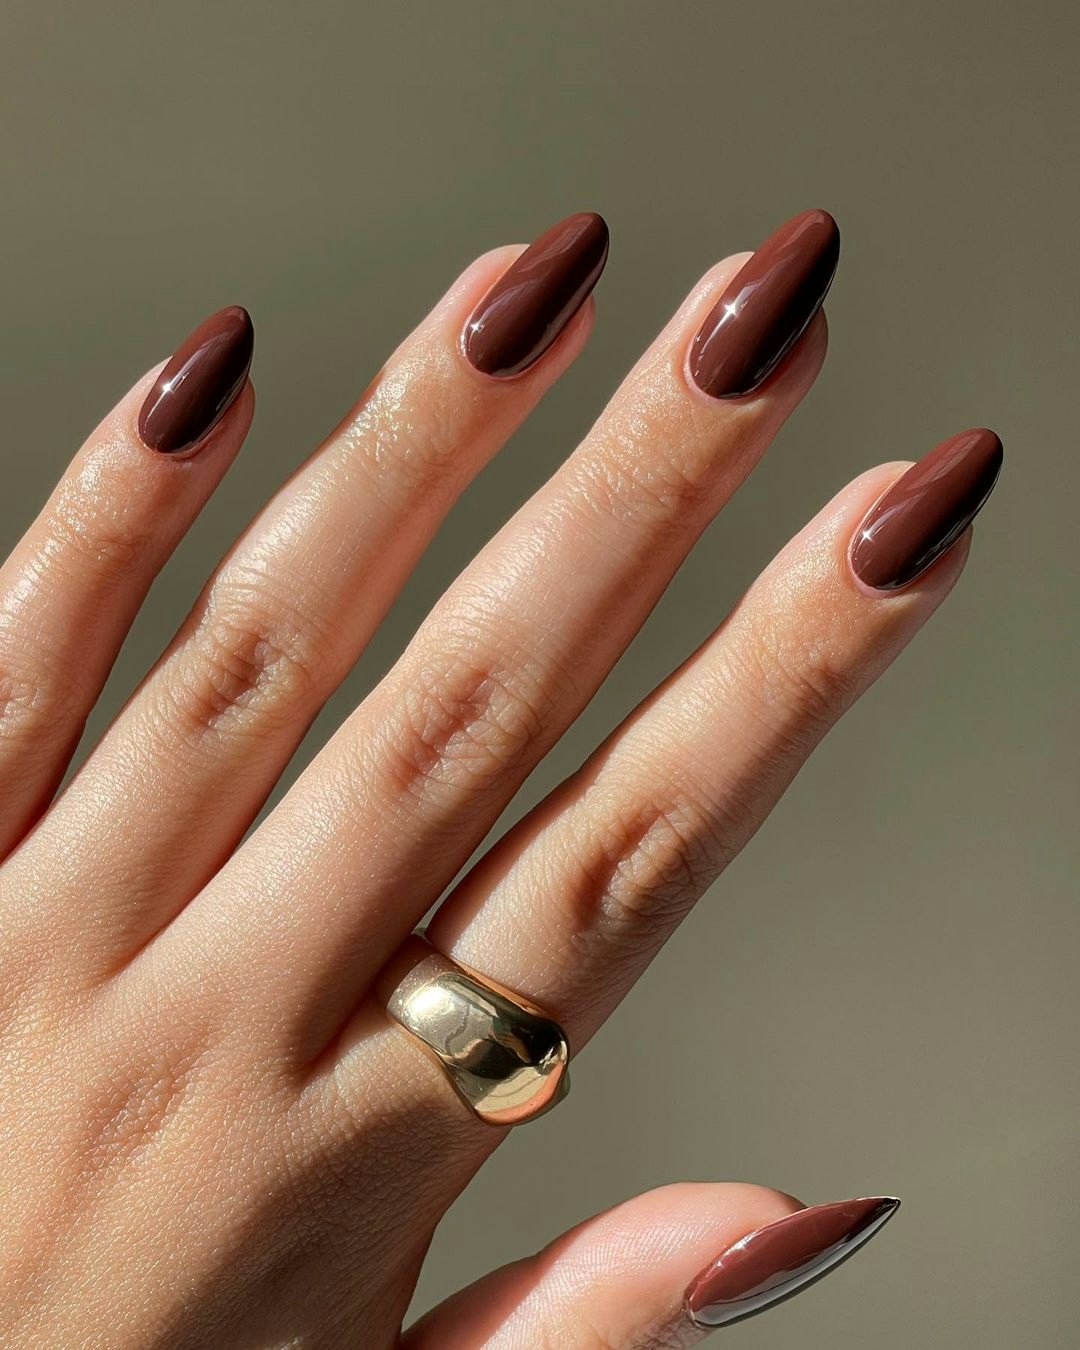 10 Chocolate Nail Colors to Try This Season - The Beauty Look Book